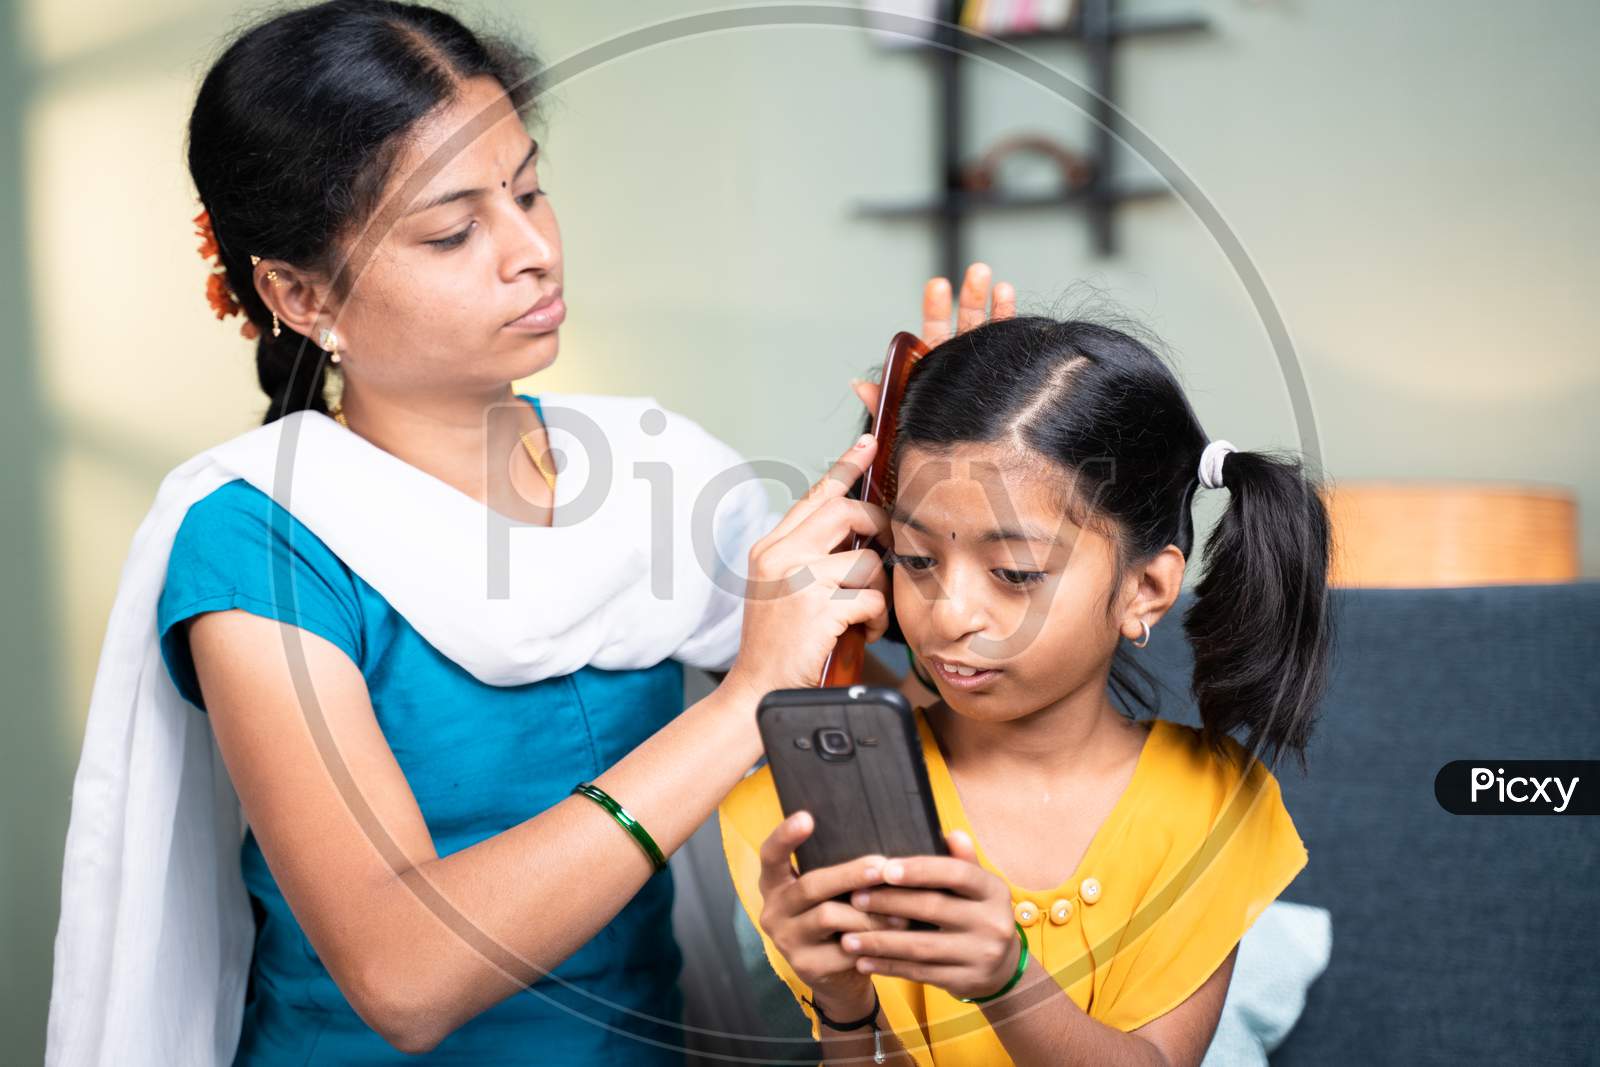 Mother Combing Her Kid Hair While Kid Busy Using Mobile Home While Sitting On Sofa At Home By Ignoring Mother - Concept Of Kids Mobile Phone, Game And Technology Addiction.